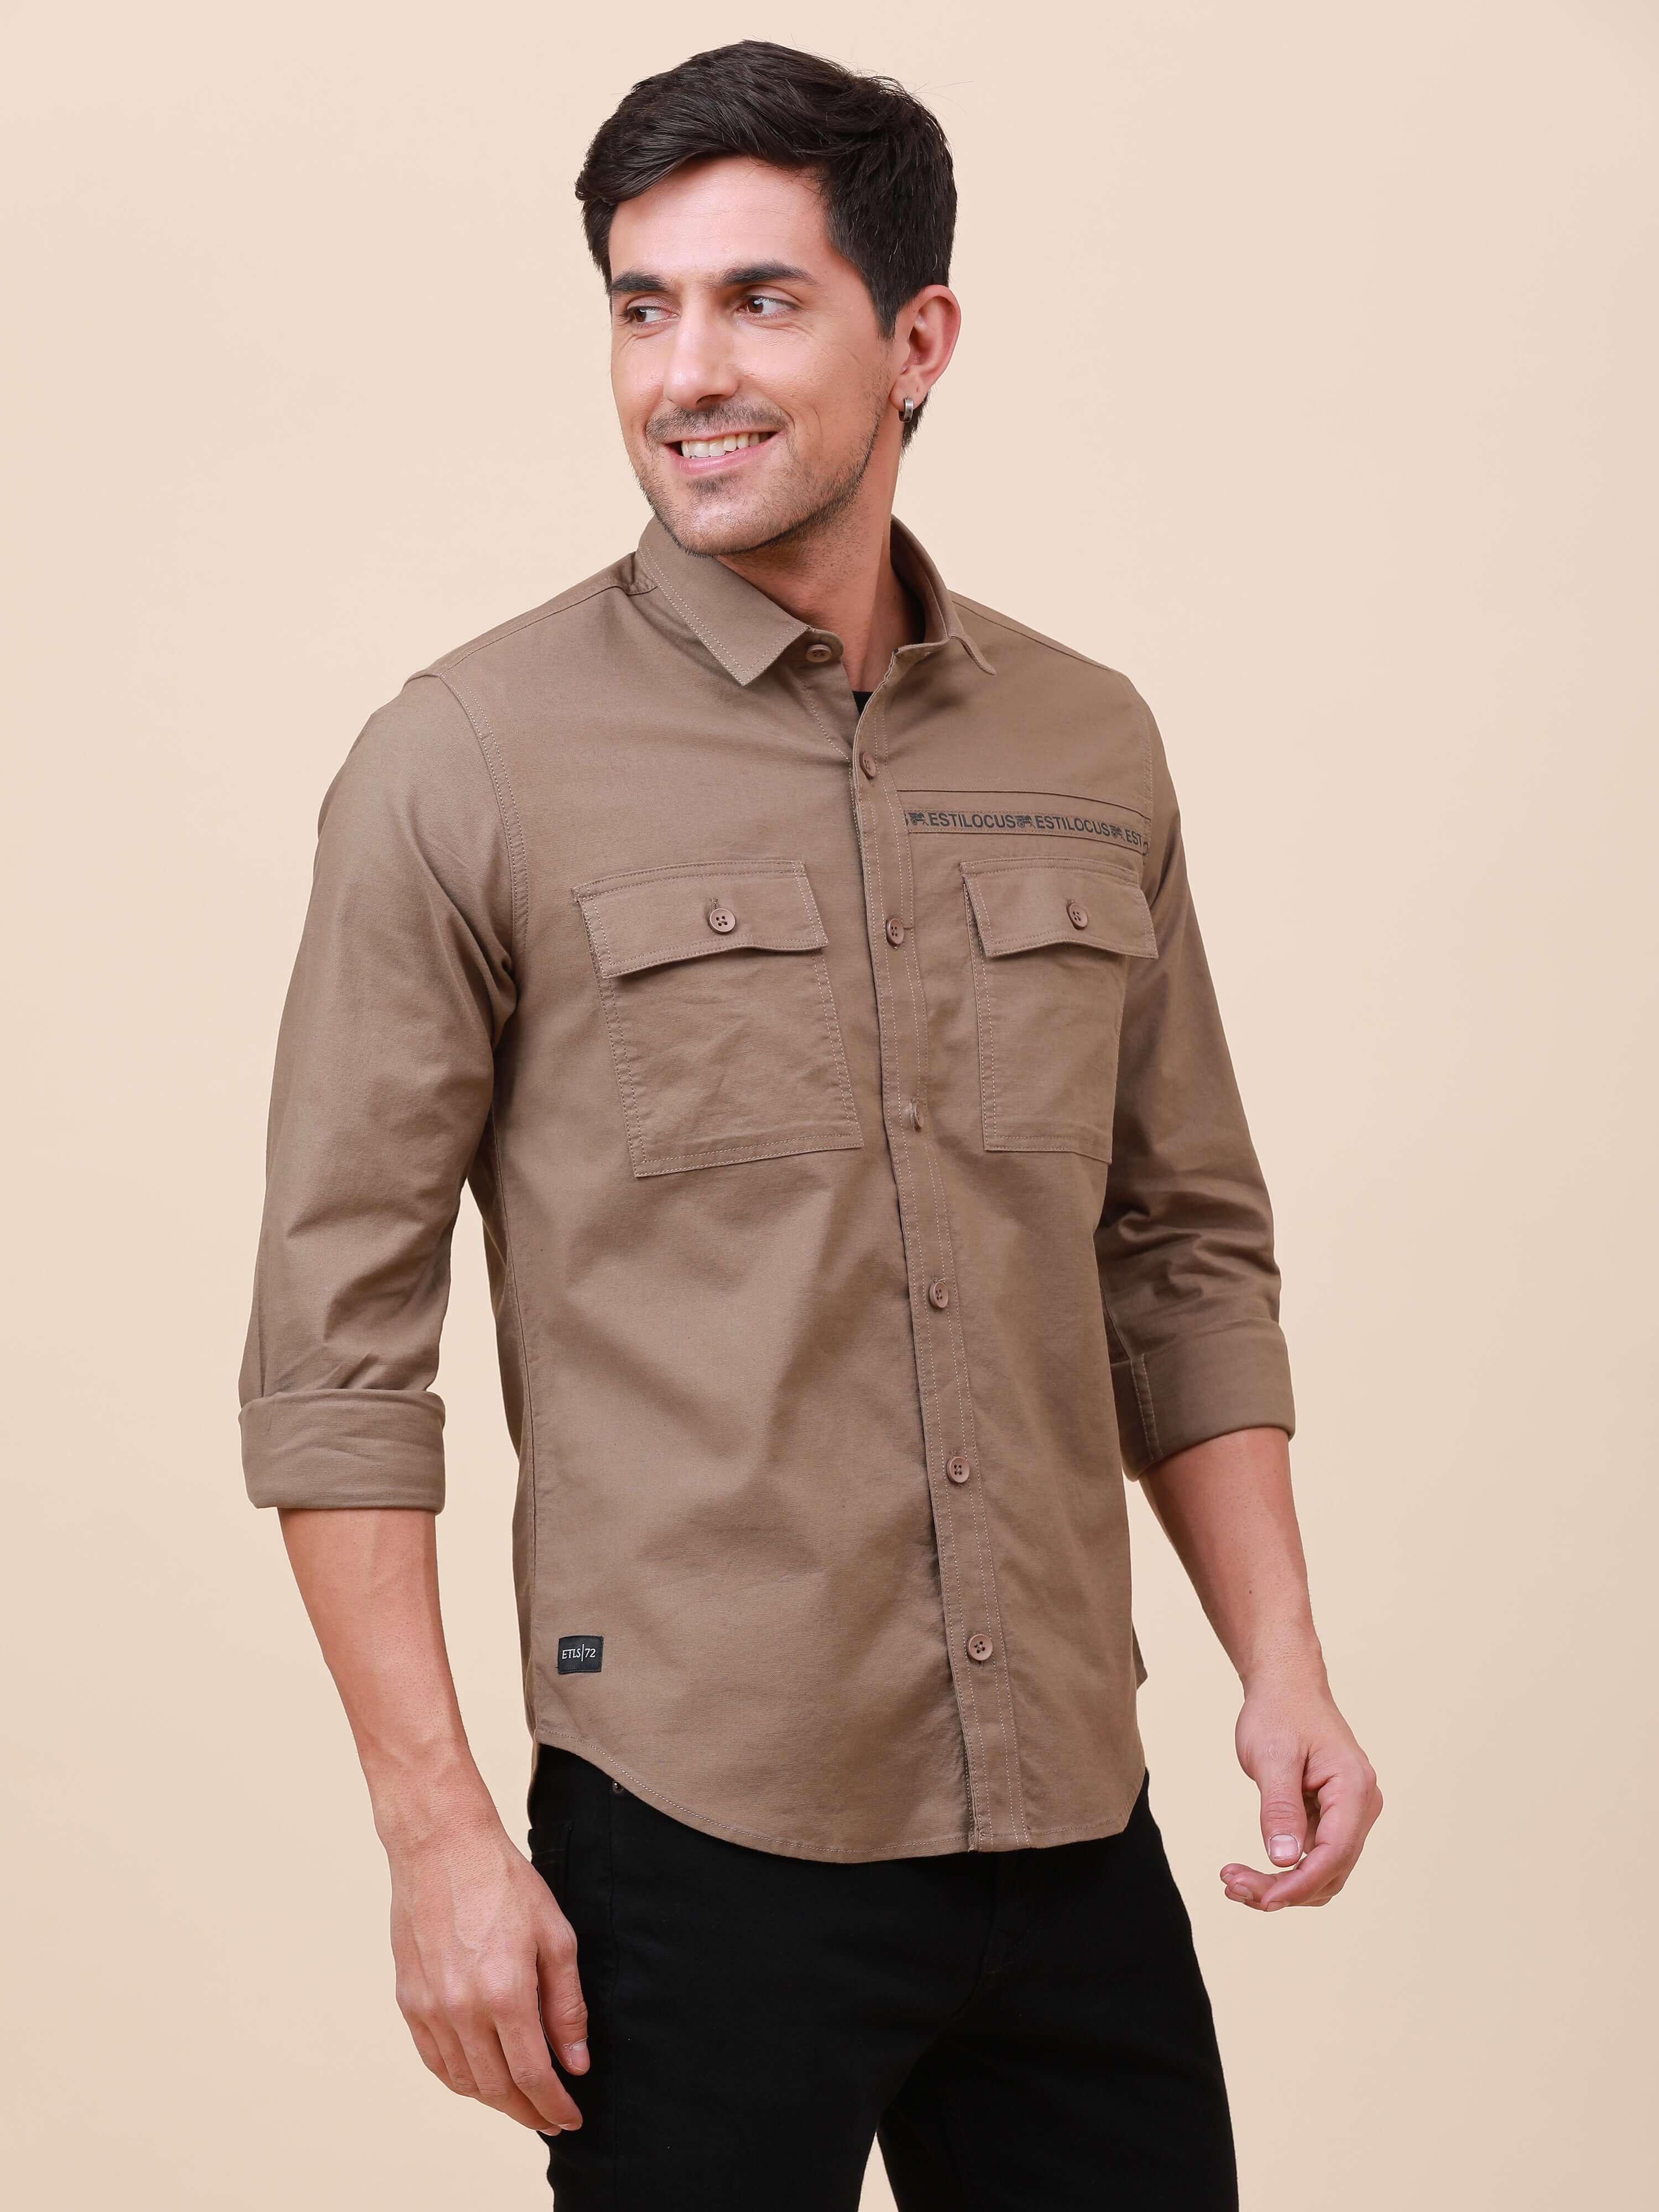 Khaki Solid Double Pocket Shirt shop online at Estilocus. 100% Cotton , Full-sleeve solid shirt Cut and sew placket Regular collar Double button edge cuff Double pocket with flap Curved bottom hemline Finest printing at front placket. All double needle co